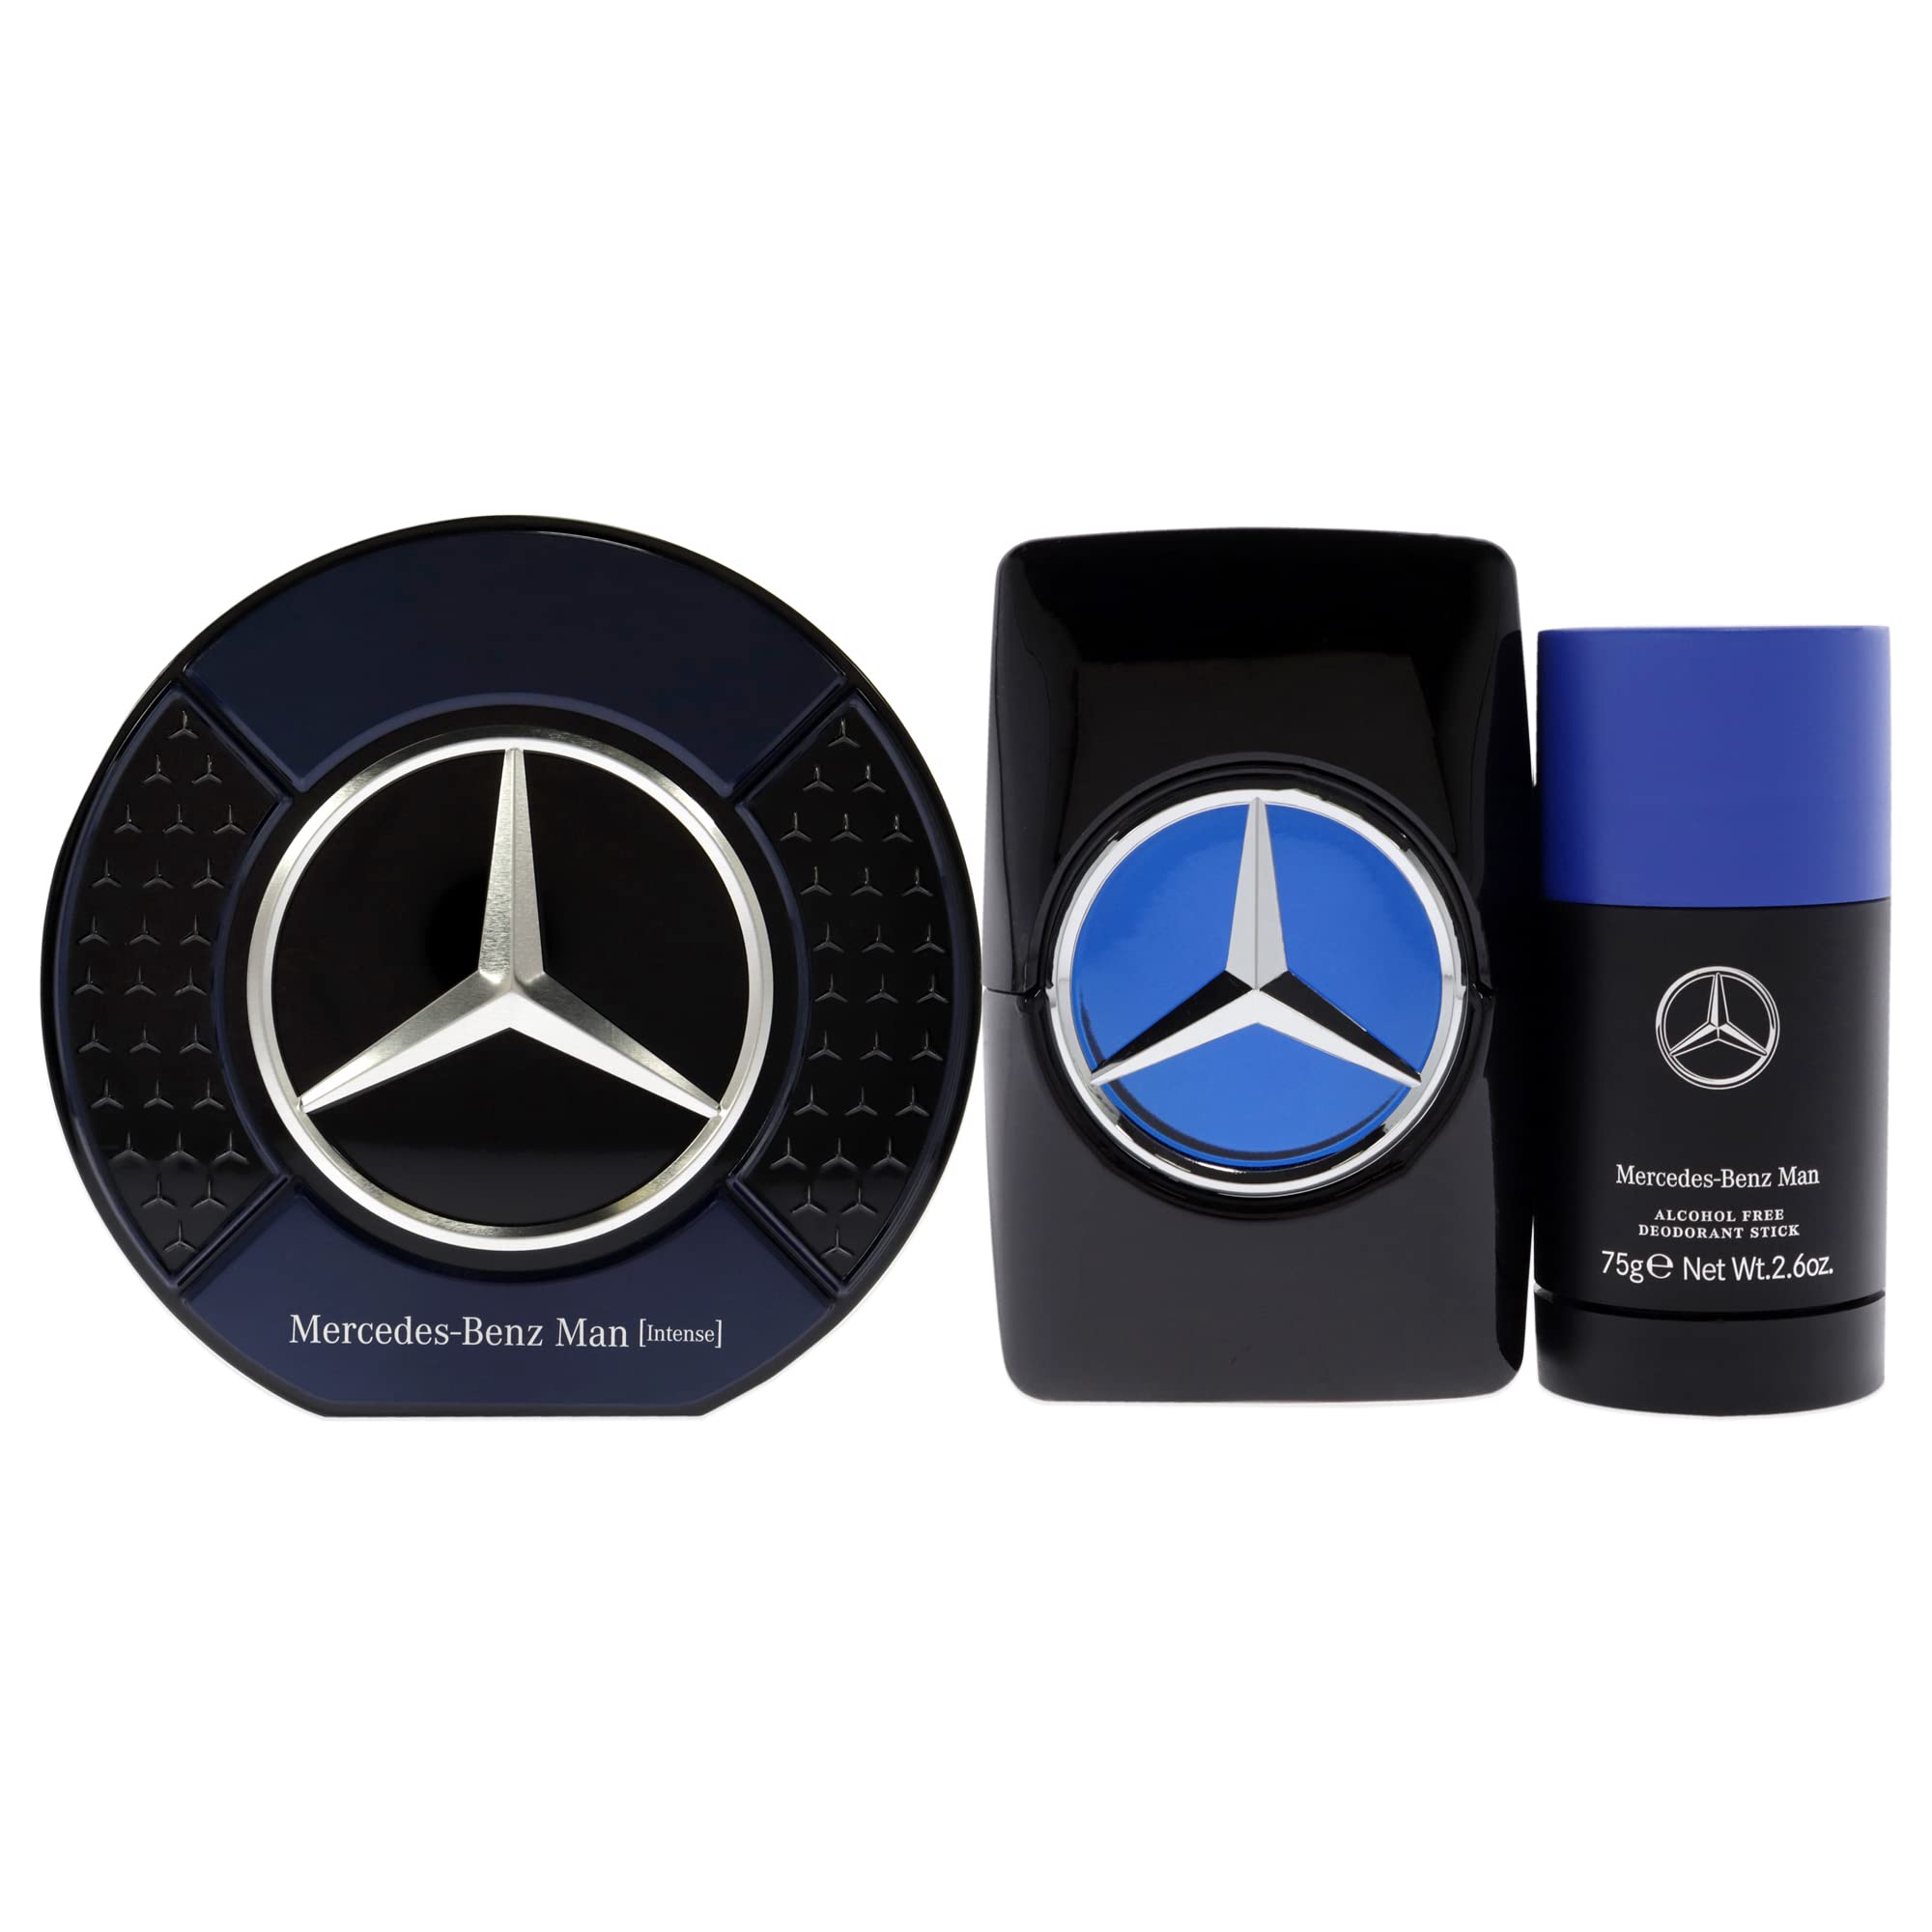 Mercedes-Benz Intense Gift Set Perfumes for Men - Includes 2.7 oz Eau de Toilette Spray and 2.6 oz Deodorant Stick - Woody Scent - Opens with Notes of Pear - Evokes Power and Sensuality - 2 pc